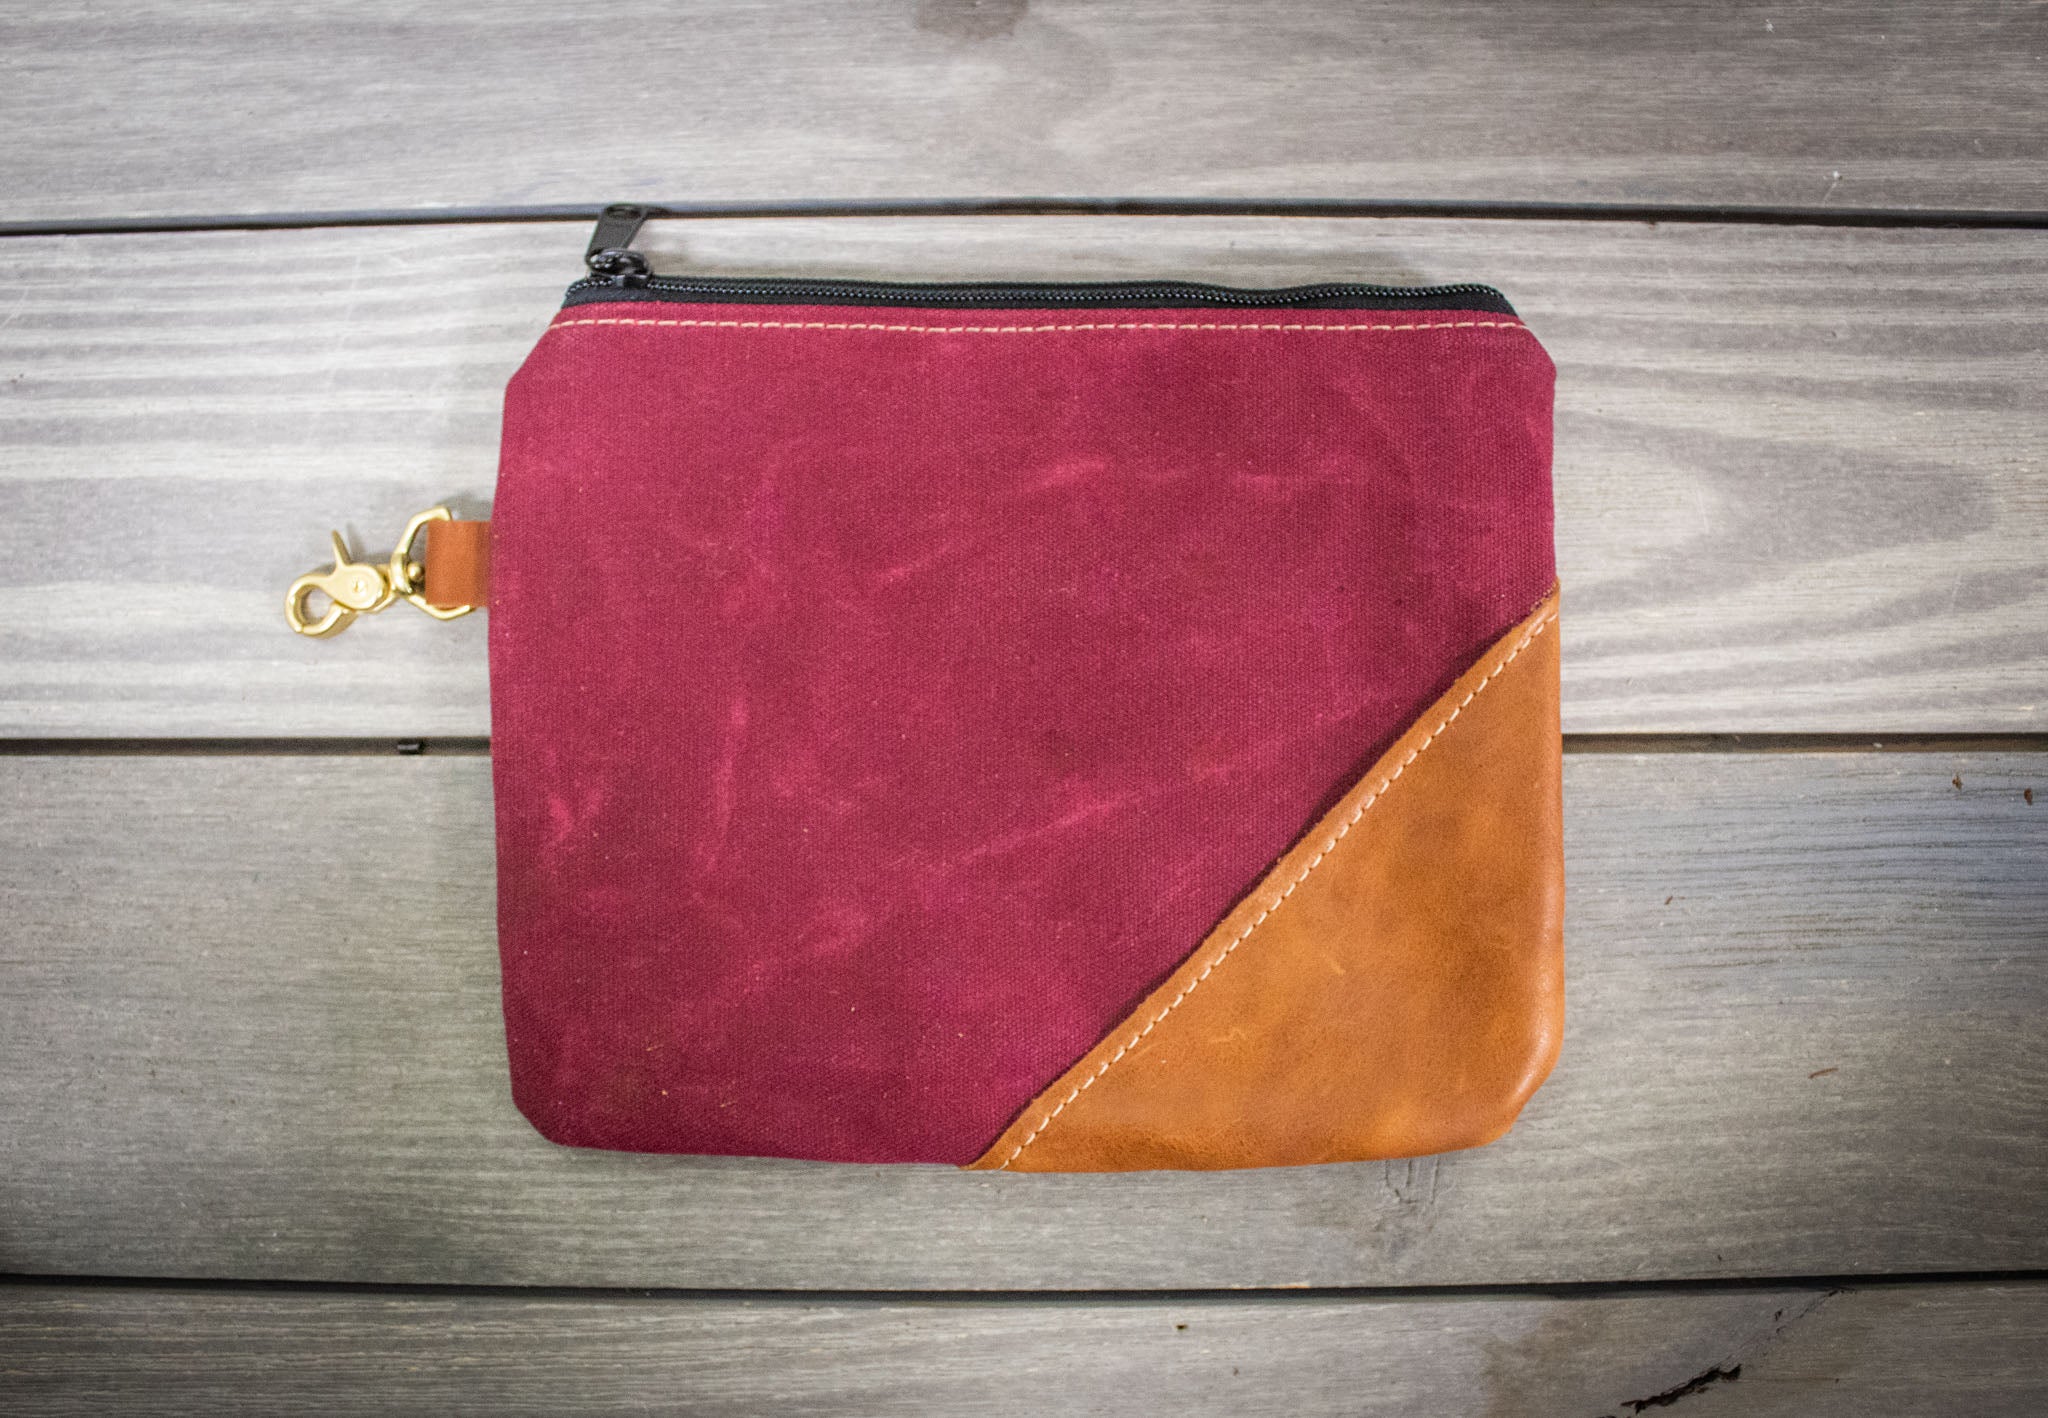 Waxed Canvas & Leather Purse - Steurer & Jacoby